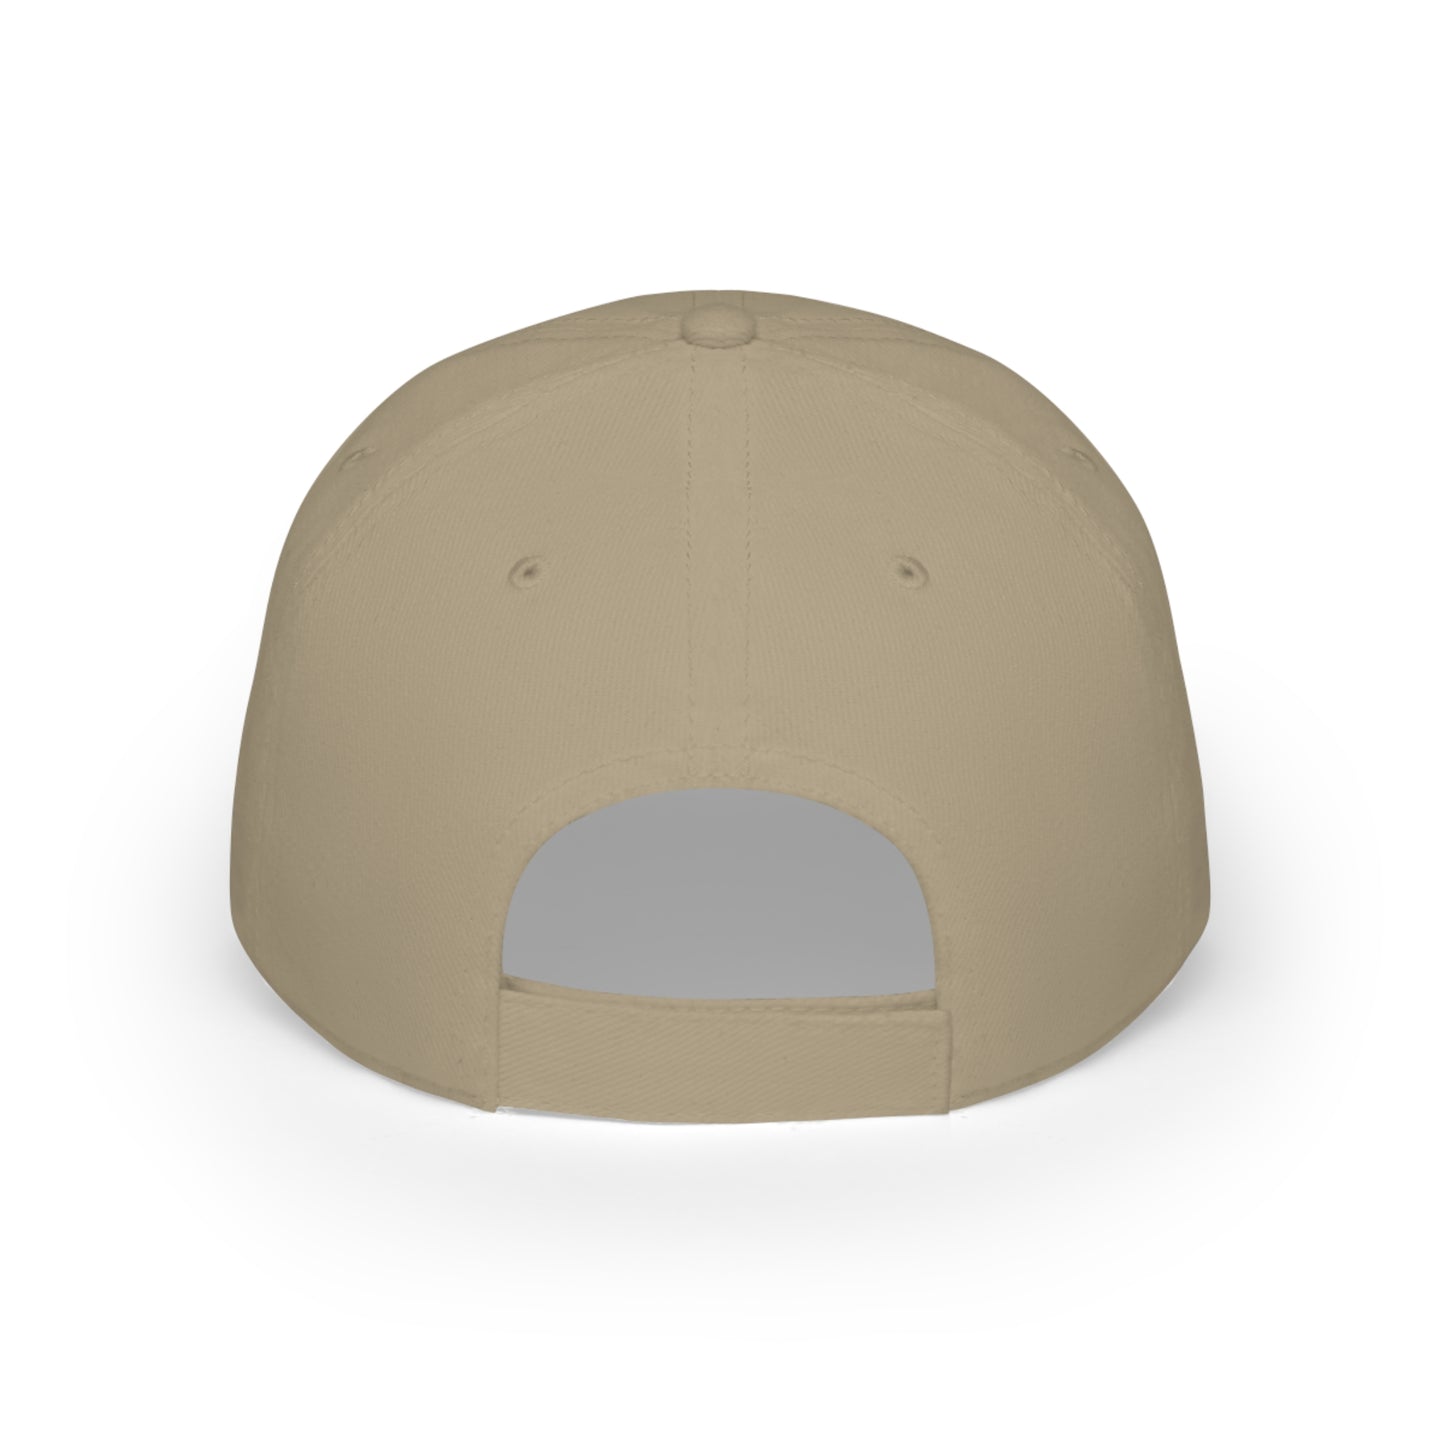 Low Profile Baseball Cap - Cougar Bait with paws